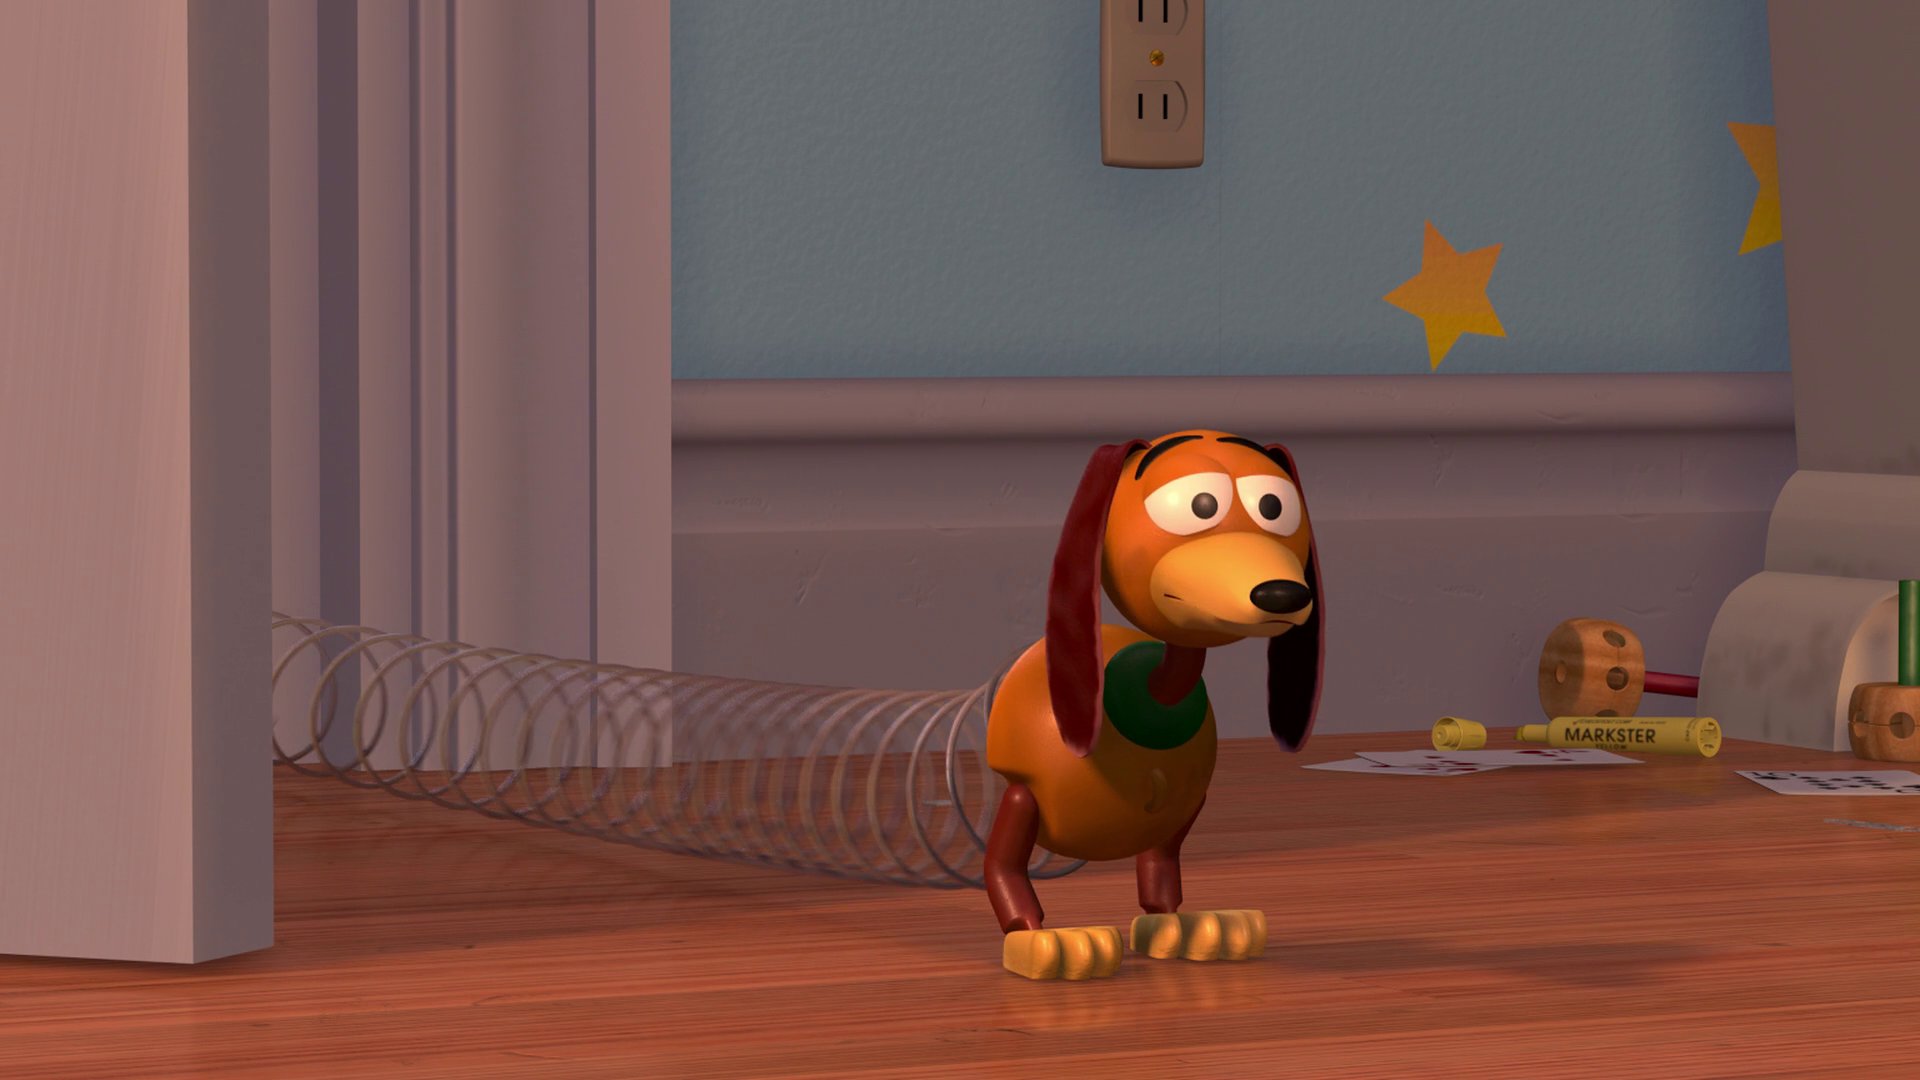 𝕞𝕠𝕧𝕚𝕖𝕡𝕠𝕝𝕝𝕫 on X: The four years in between Toy Story 1 & 2 and  the smoother models & rendering shows in Slinky Dog, who looks the same but  so much smoother 